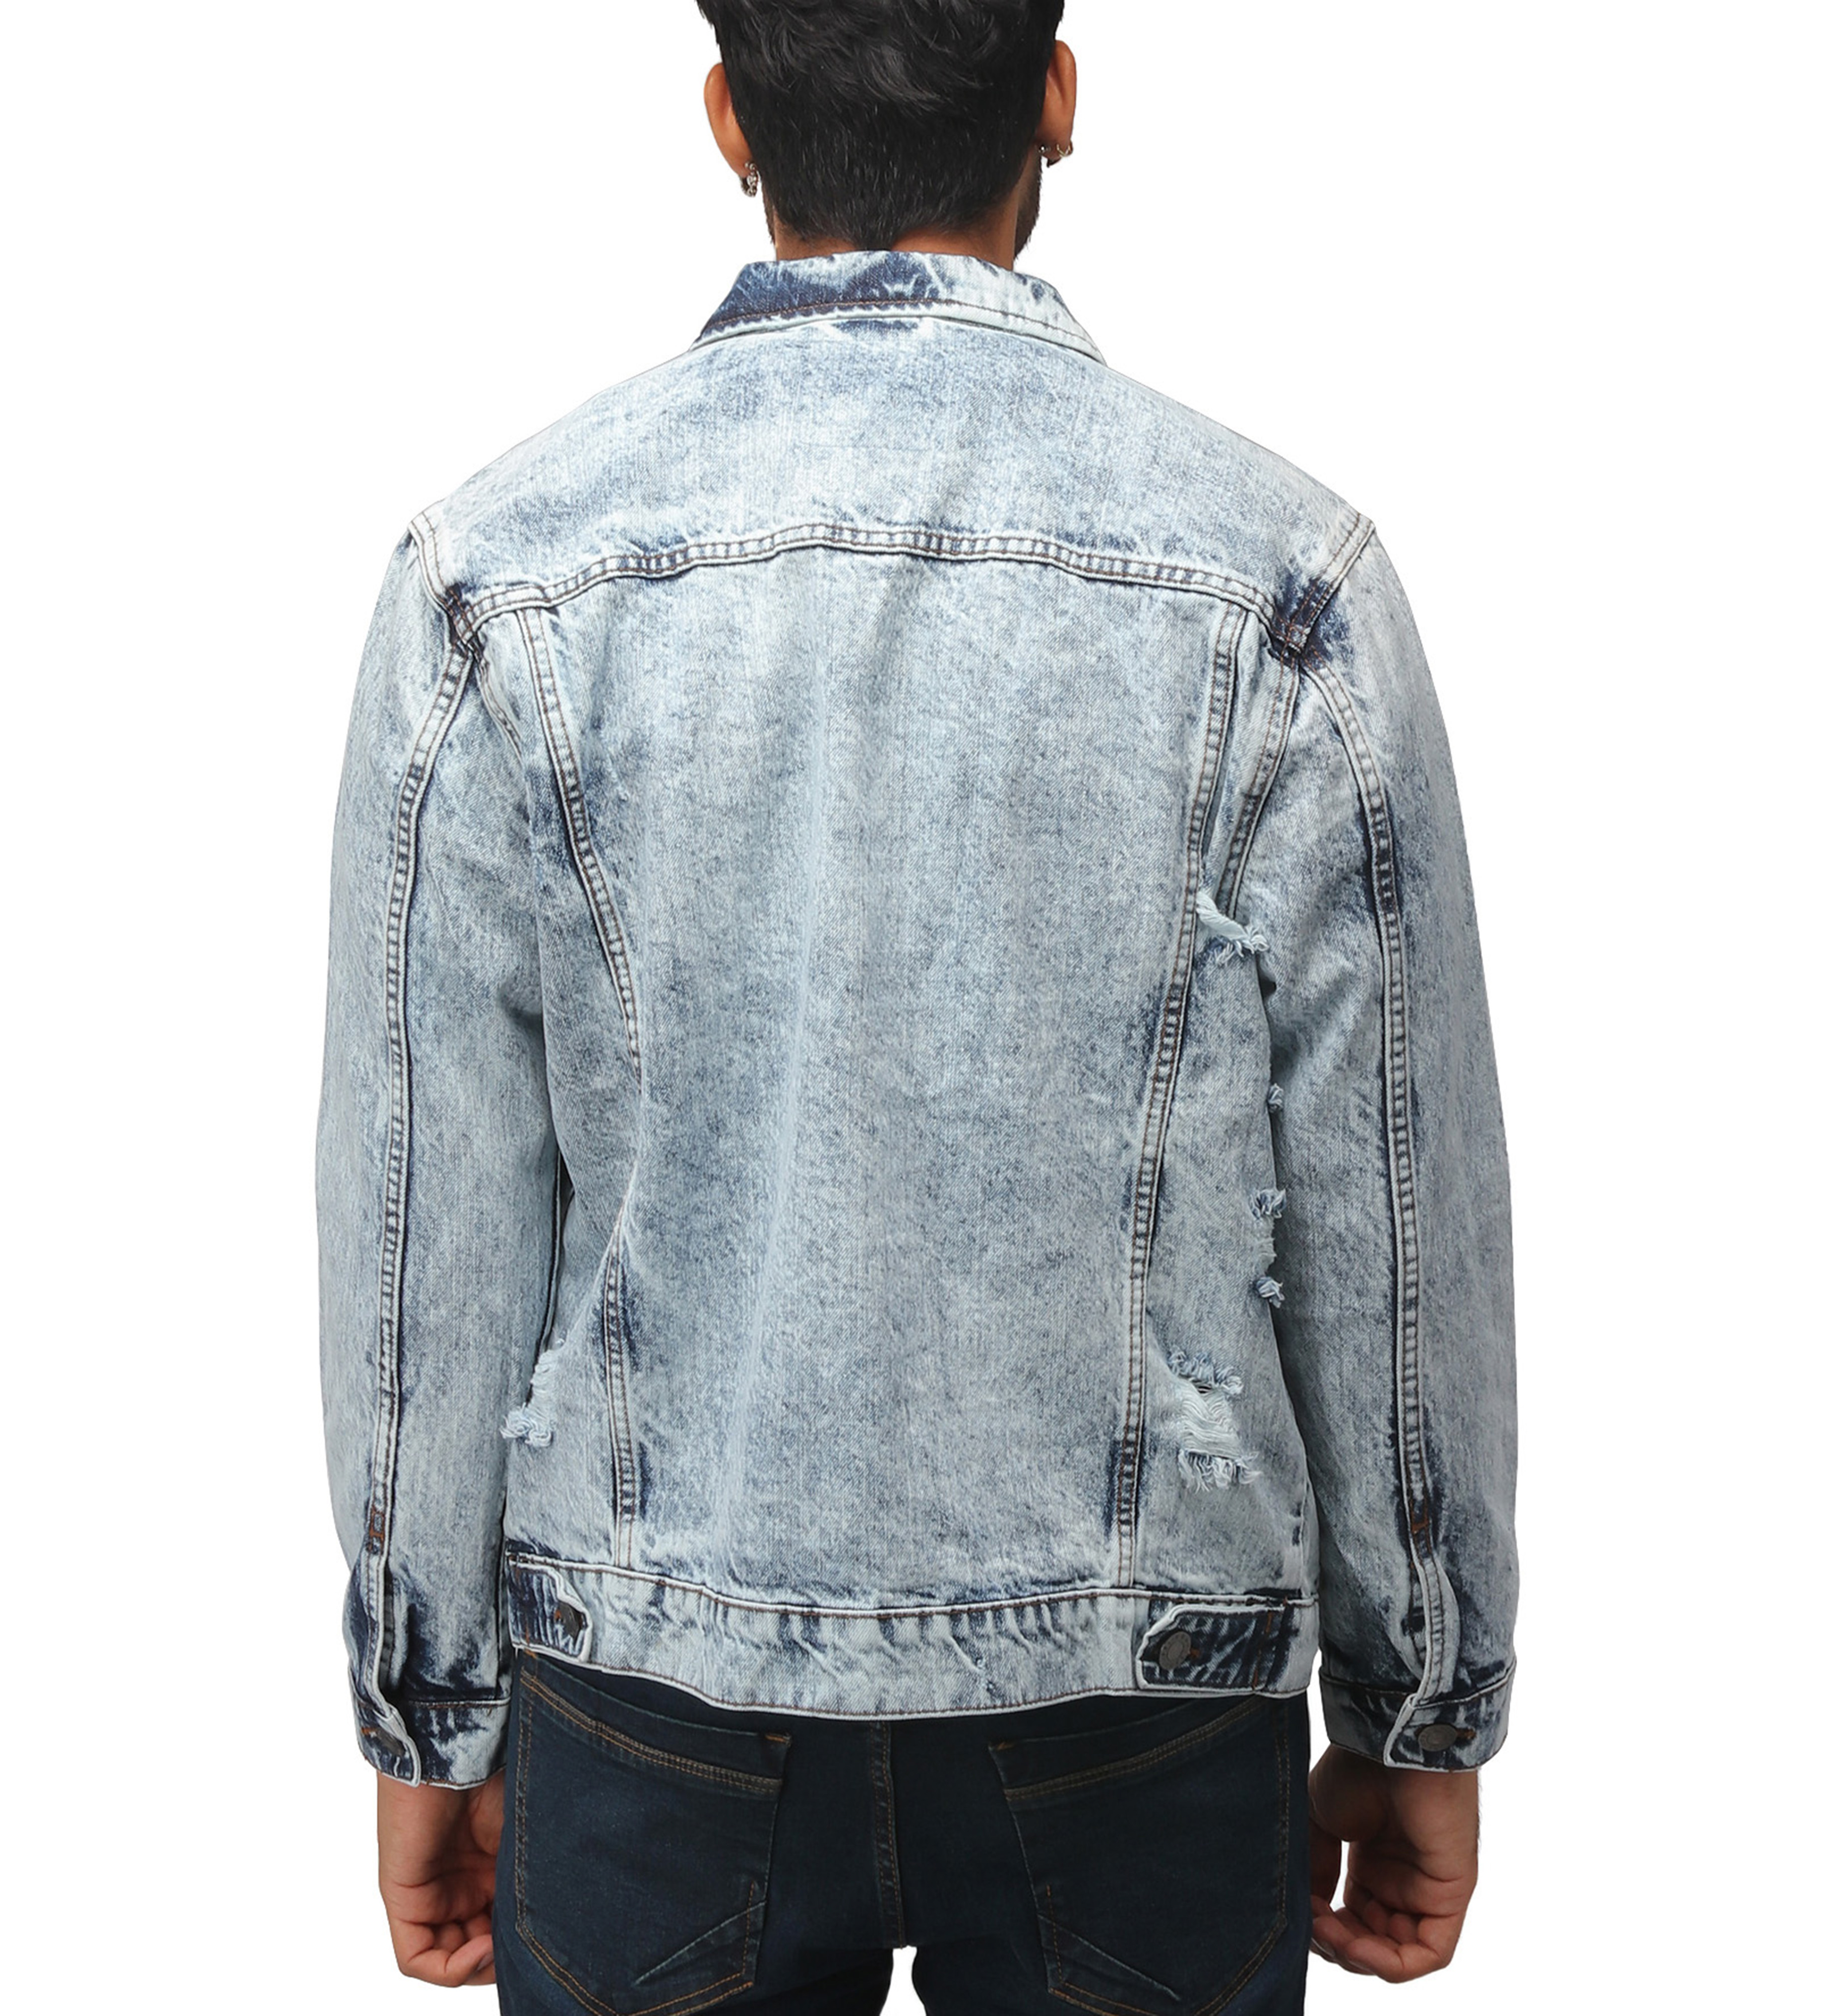 X RAY Men's Denim Jacket, Washed Ripped Distressed Flex Stretch Casual Trucker Biker Jean Jacket, Acid Blue - Ripped, Small - image 3 of 9